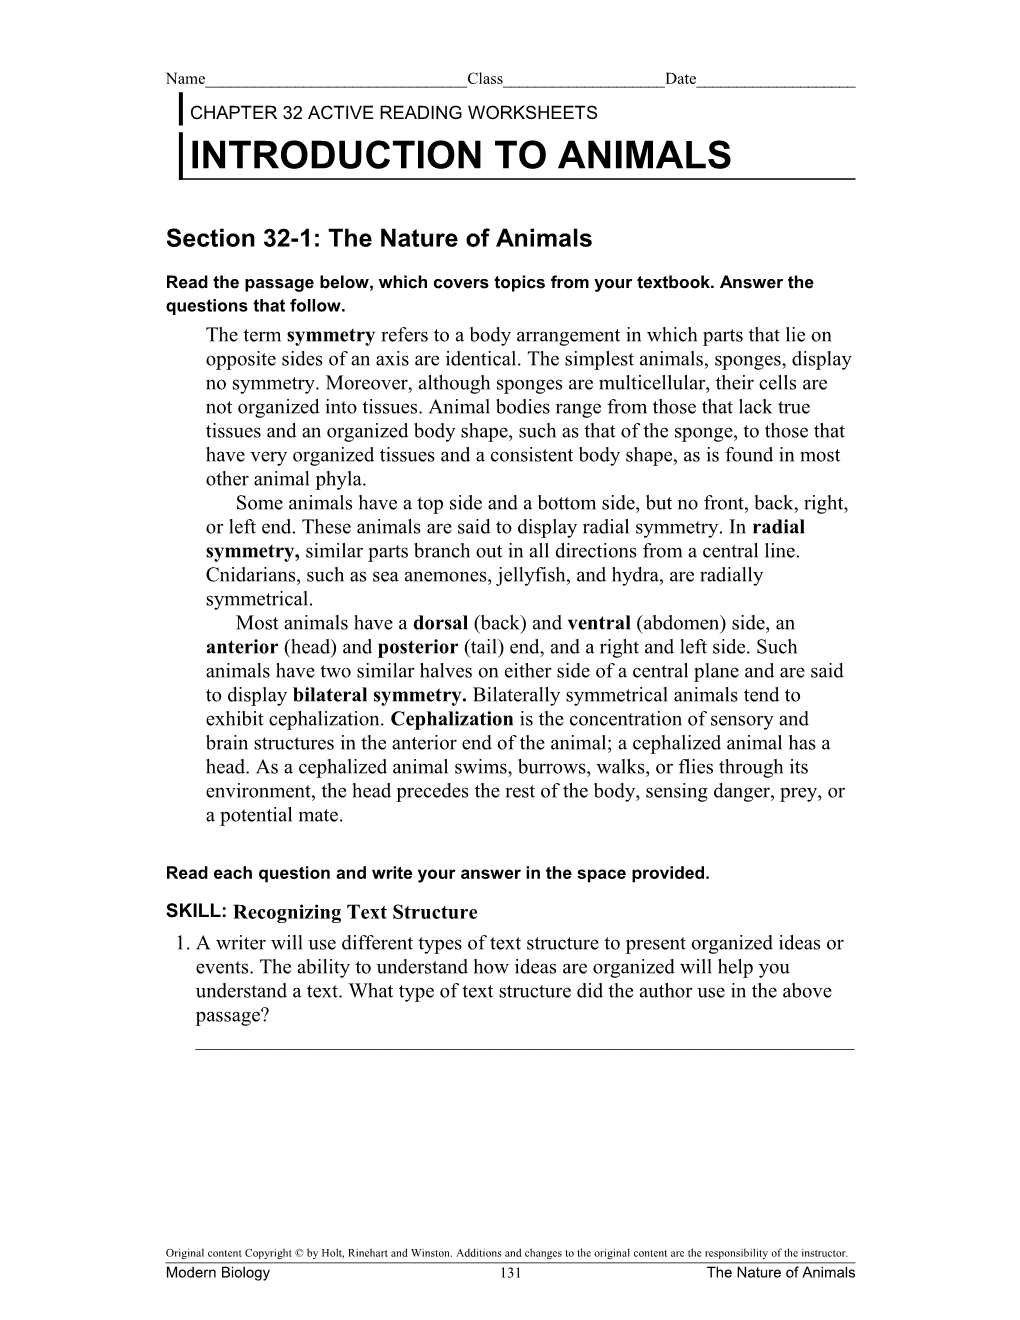 Chapter 32 Active Reading Worksheets